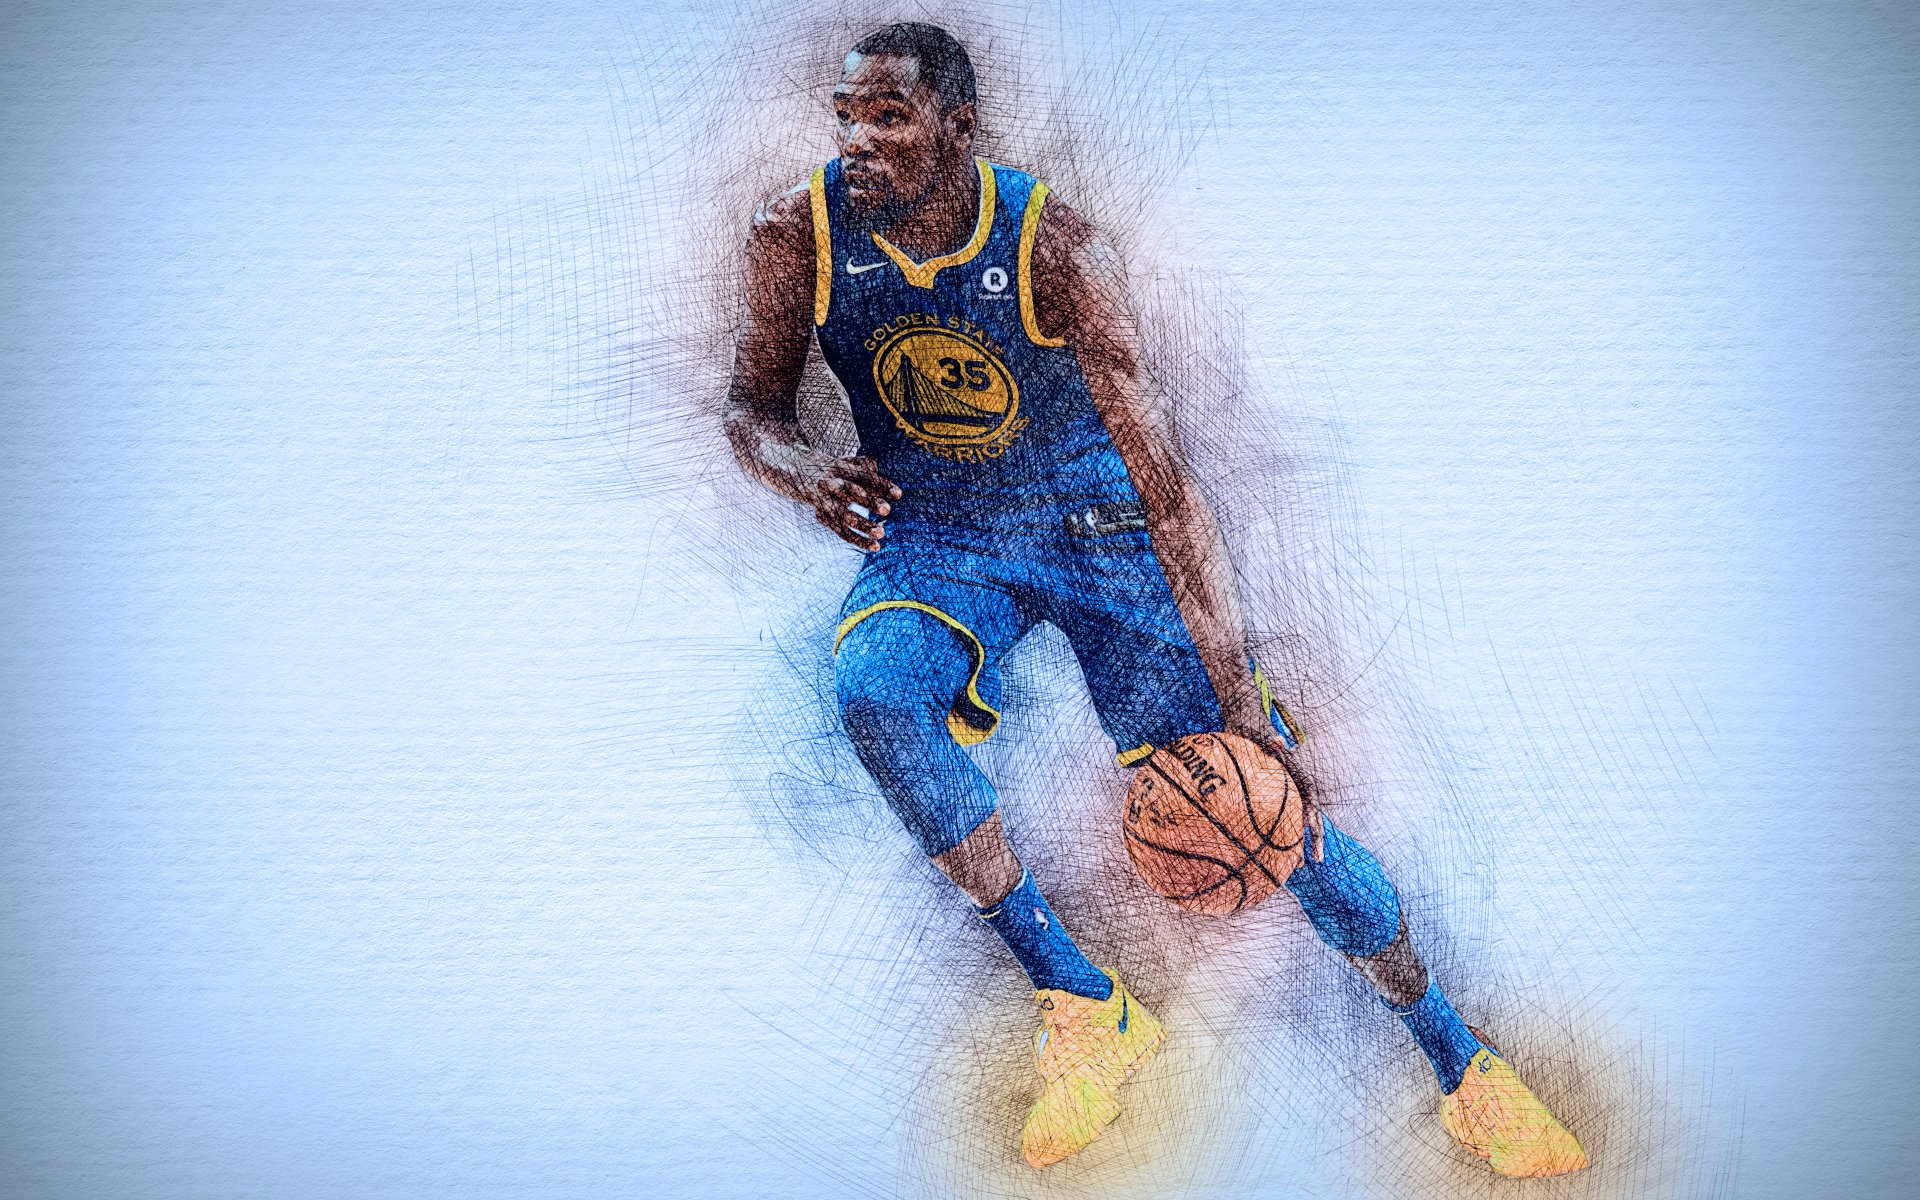 wallpaper kevin durant jersey